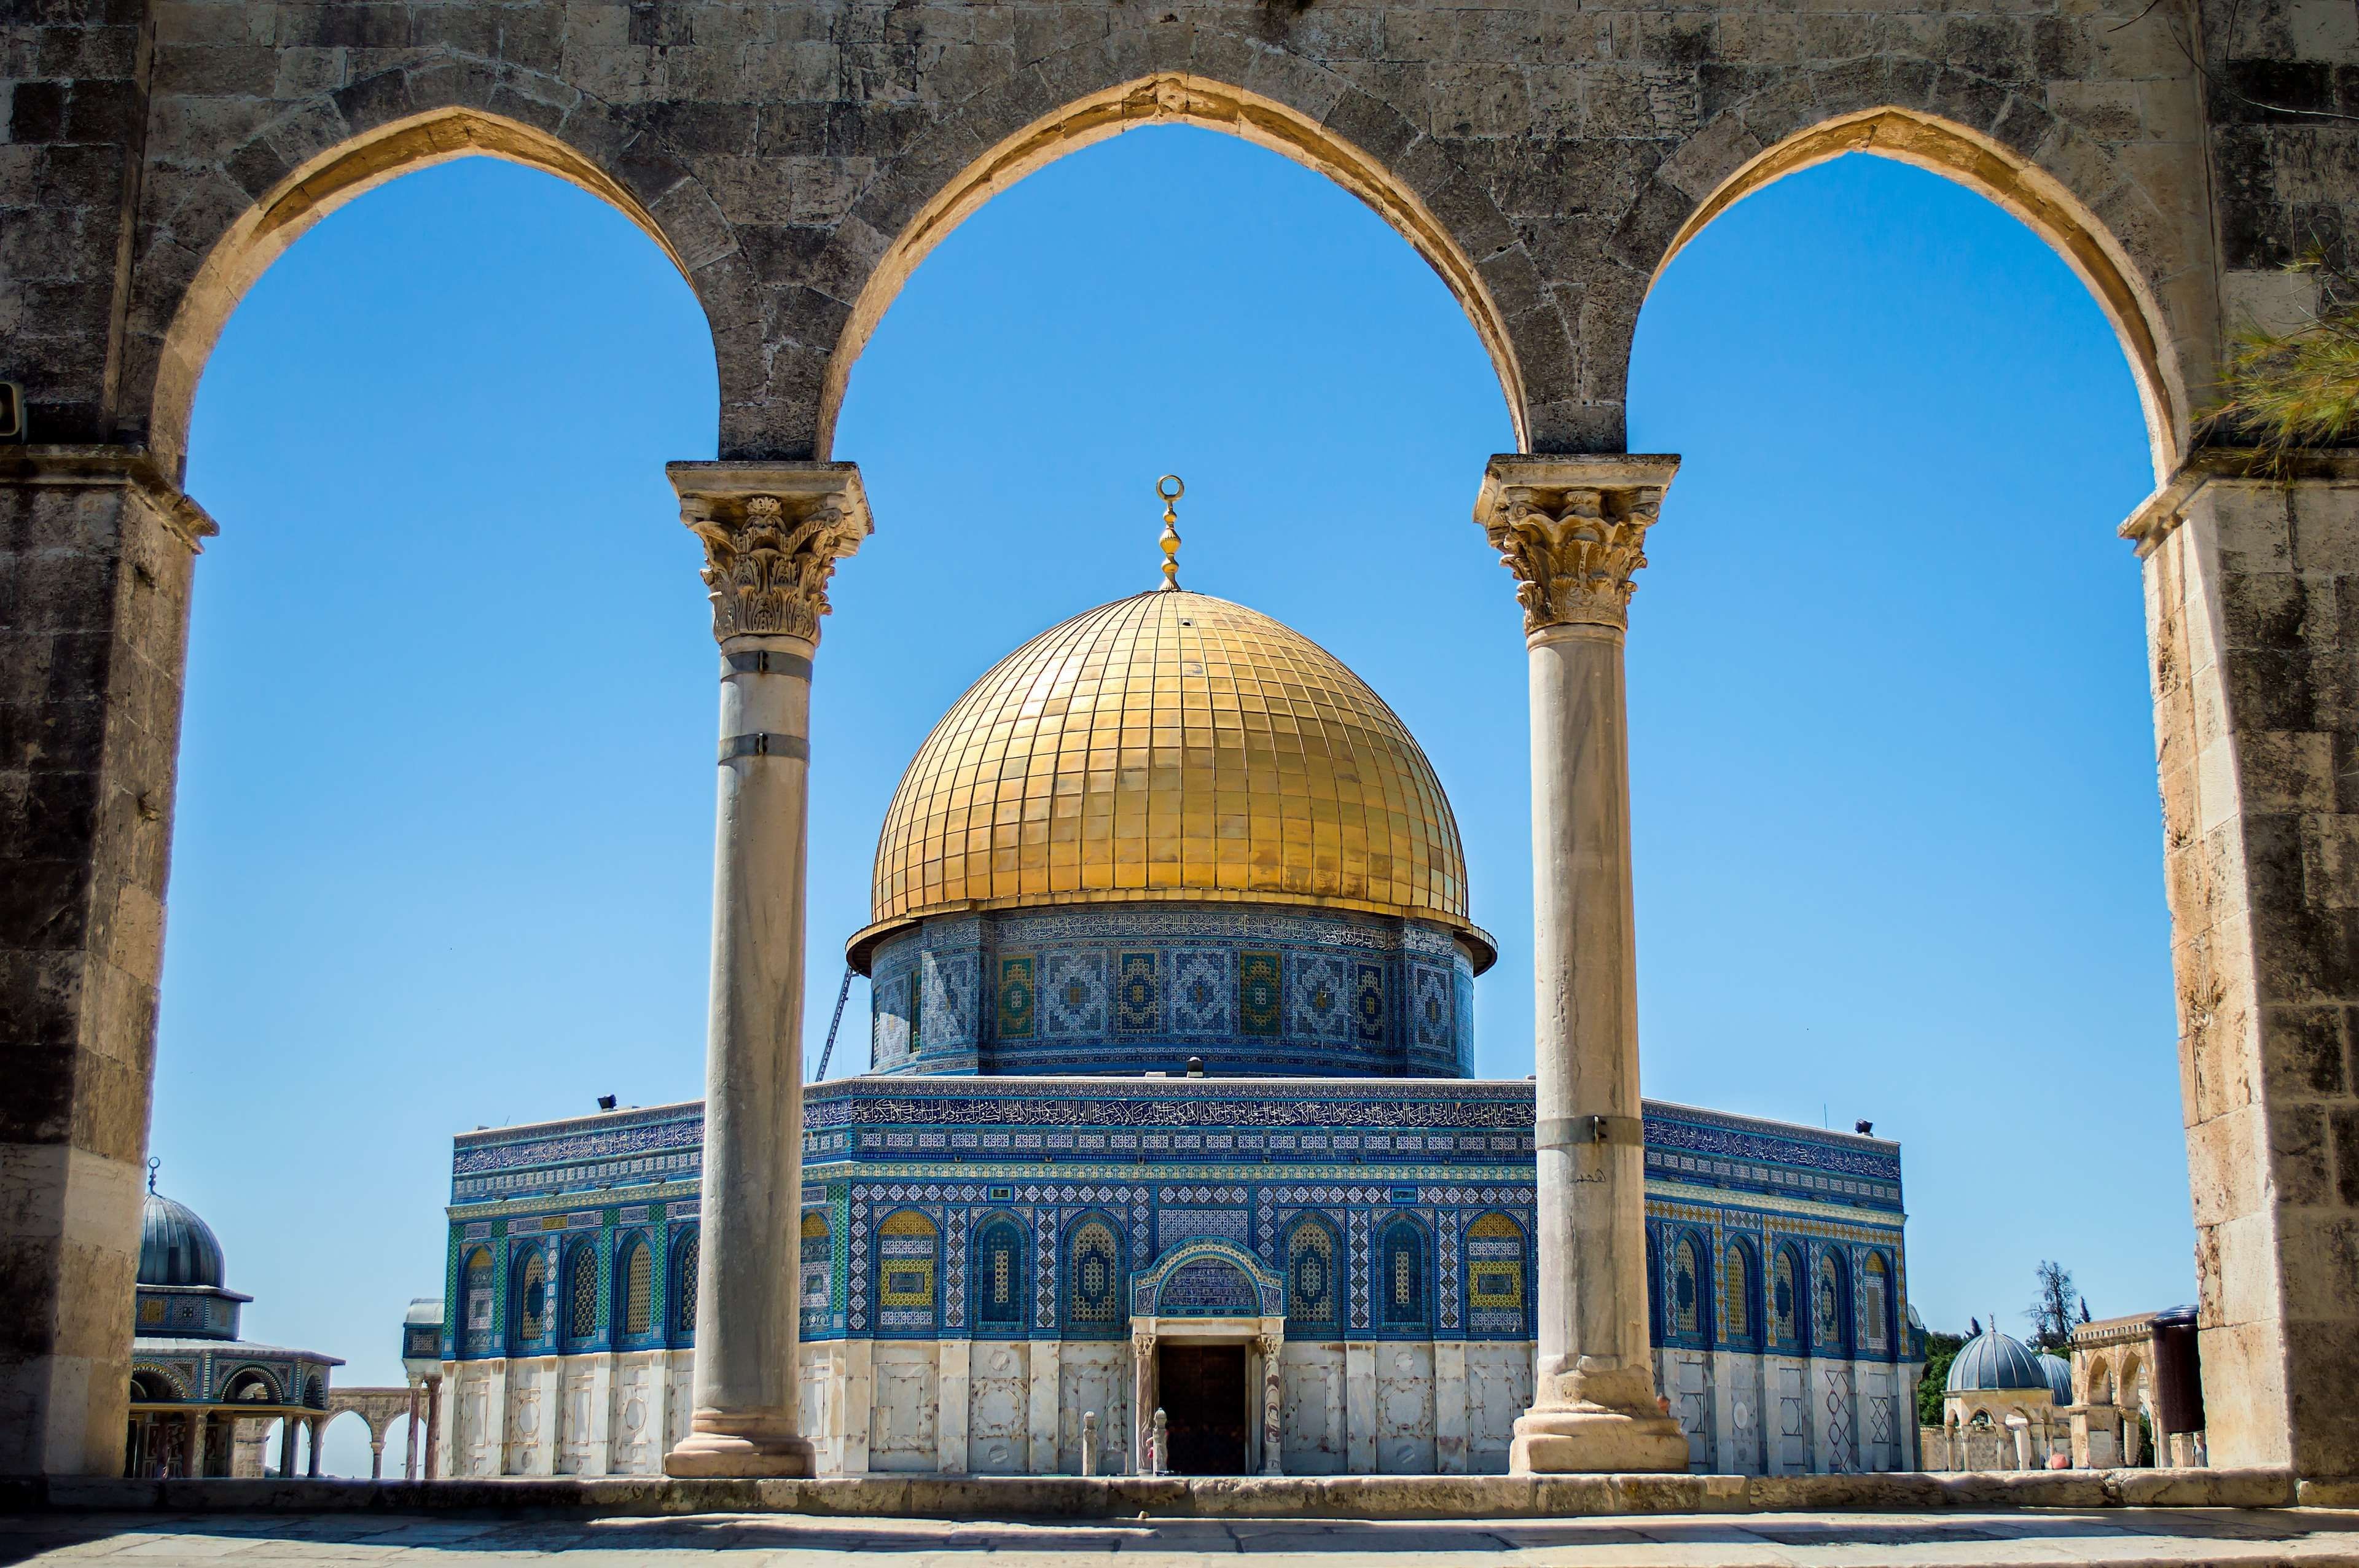 Mosques Aqsa Wallpaper Awesome Aqsa Dome Of the Rock On the Temple